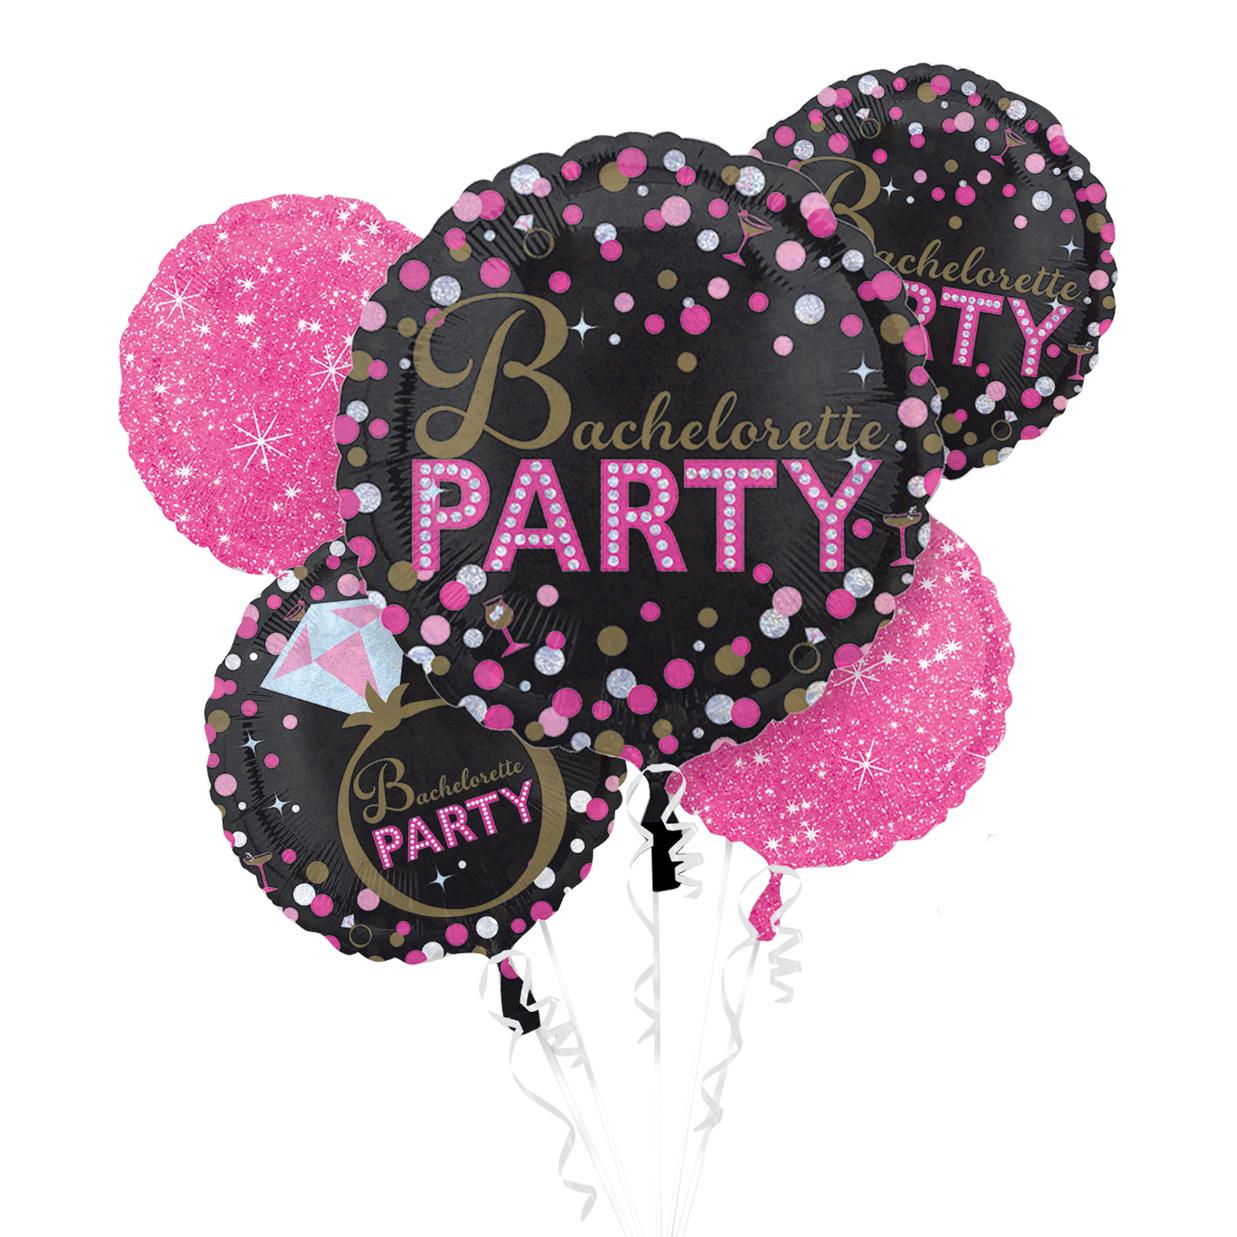 Bachelorette Sassy Party Balloon Bouquet 5pcs Balloons & Streamers - Party Centre